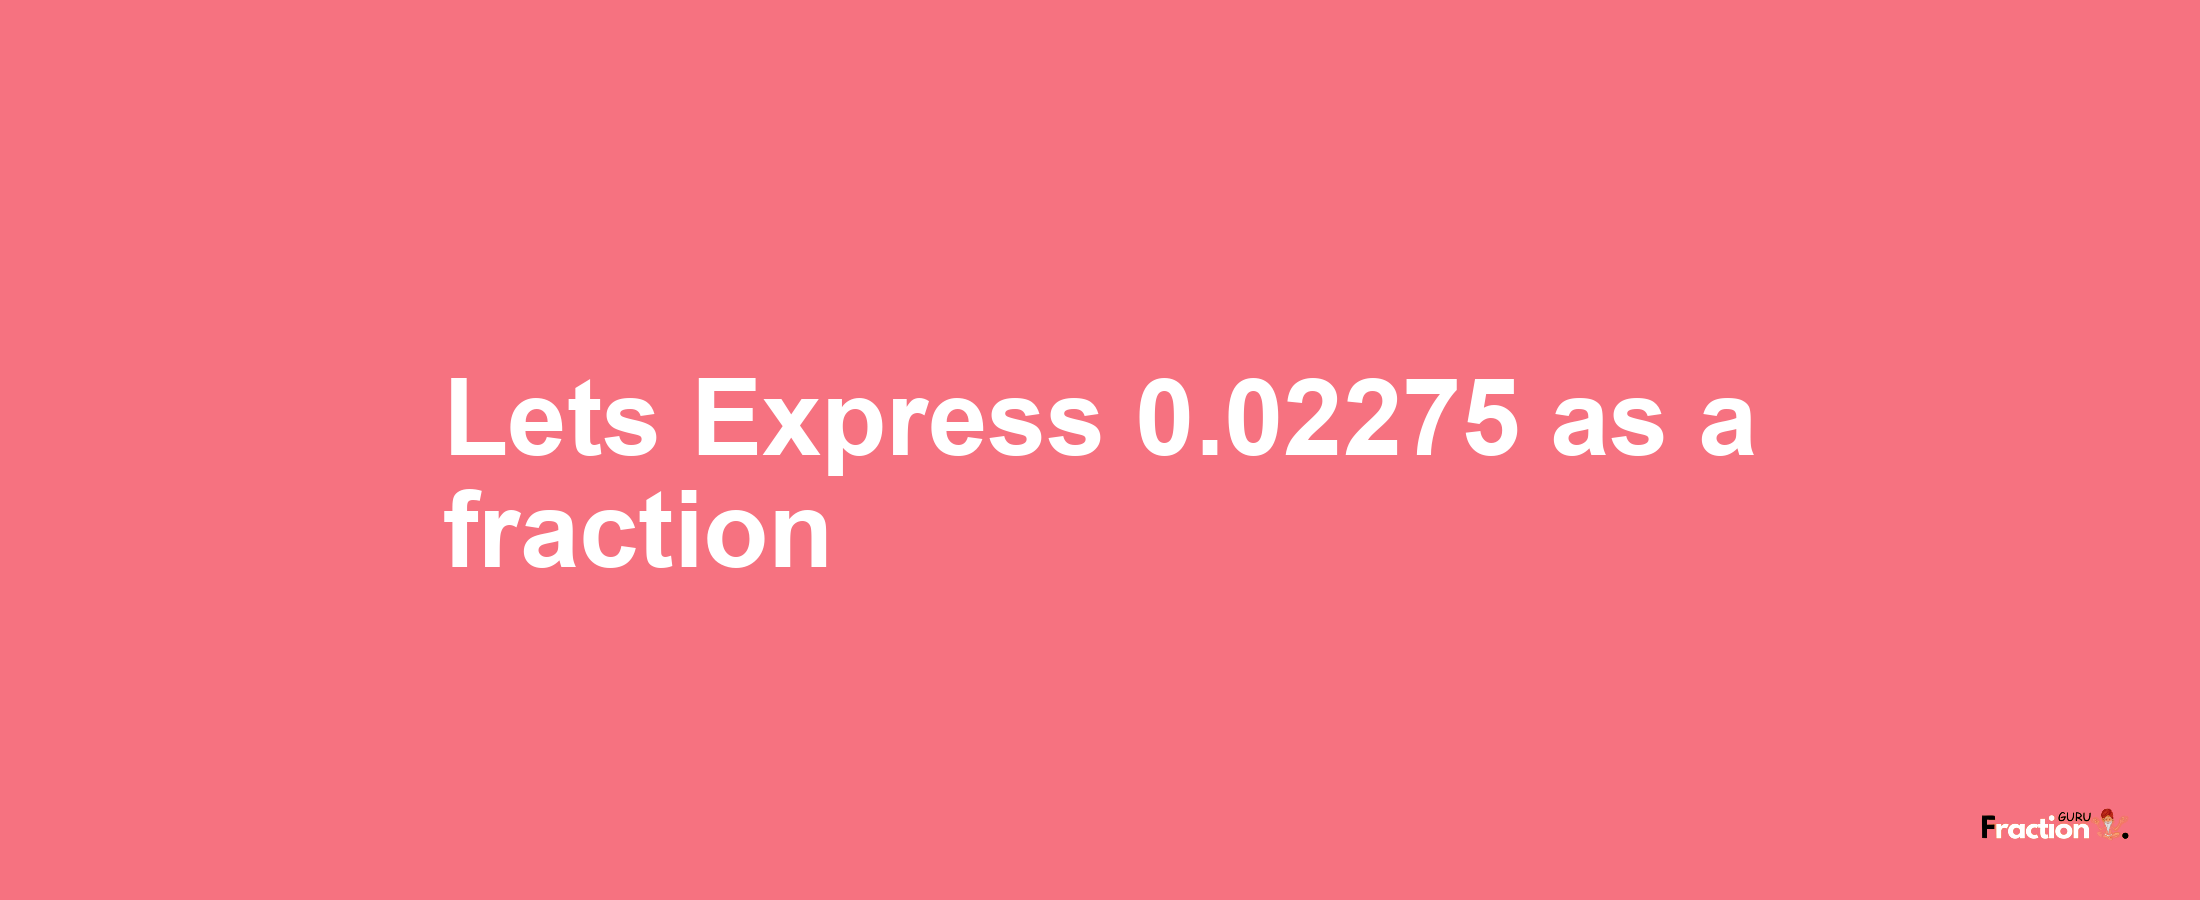 Lets Express 0.02275 as afraction